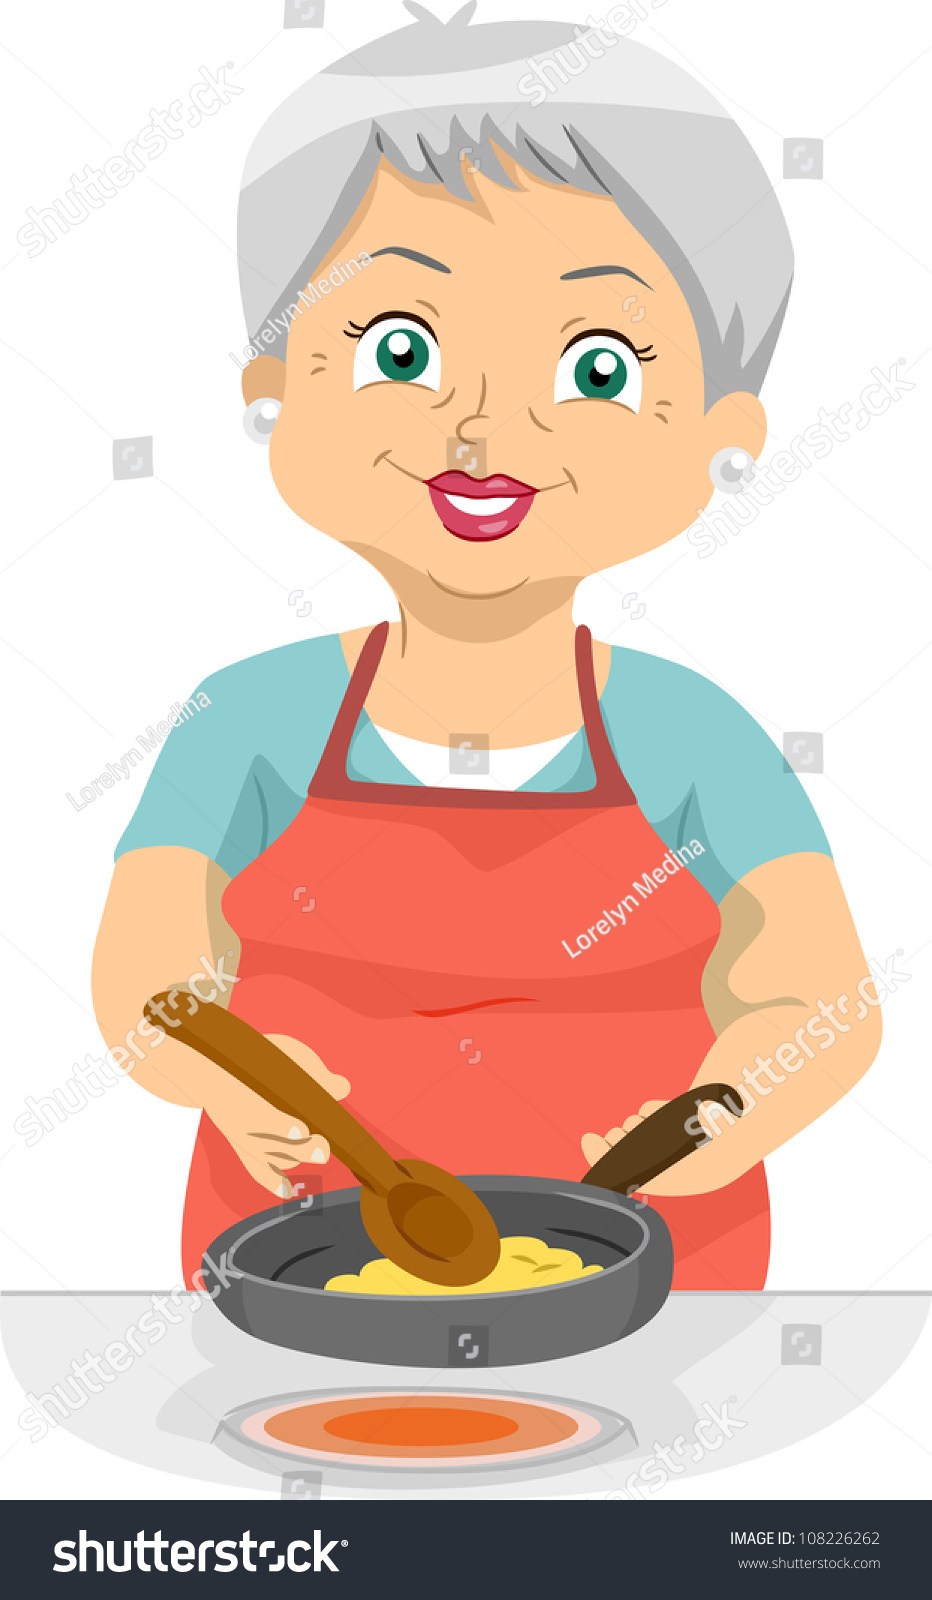 Illustration Featuring Elderly Woman Cooking Stock Vector 108226262 ...